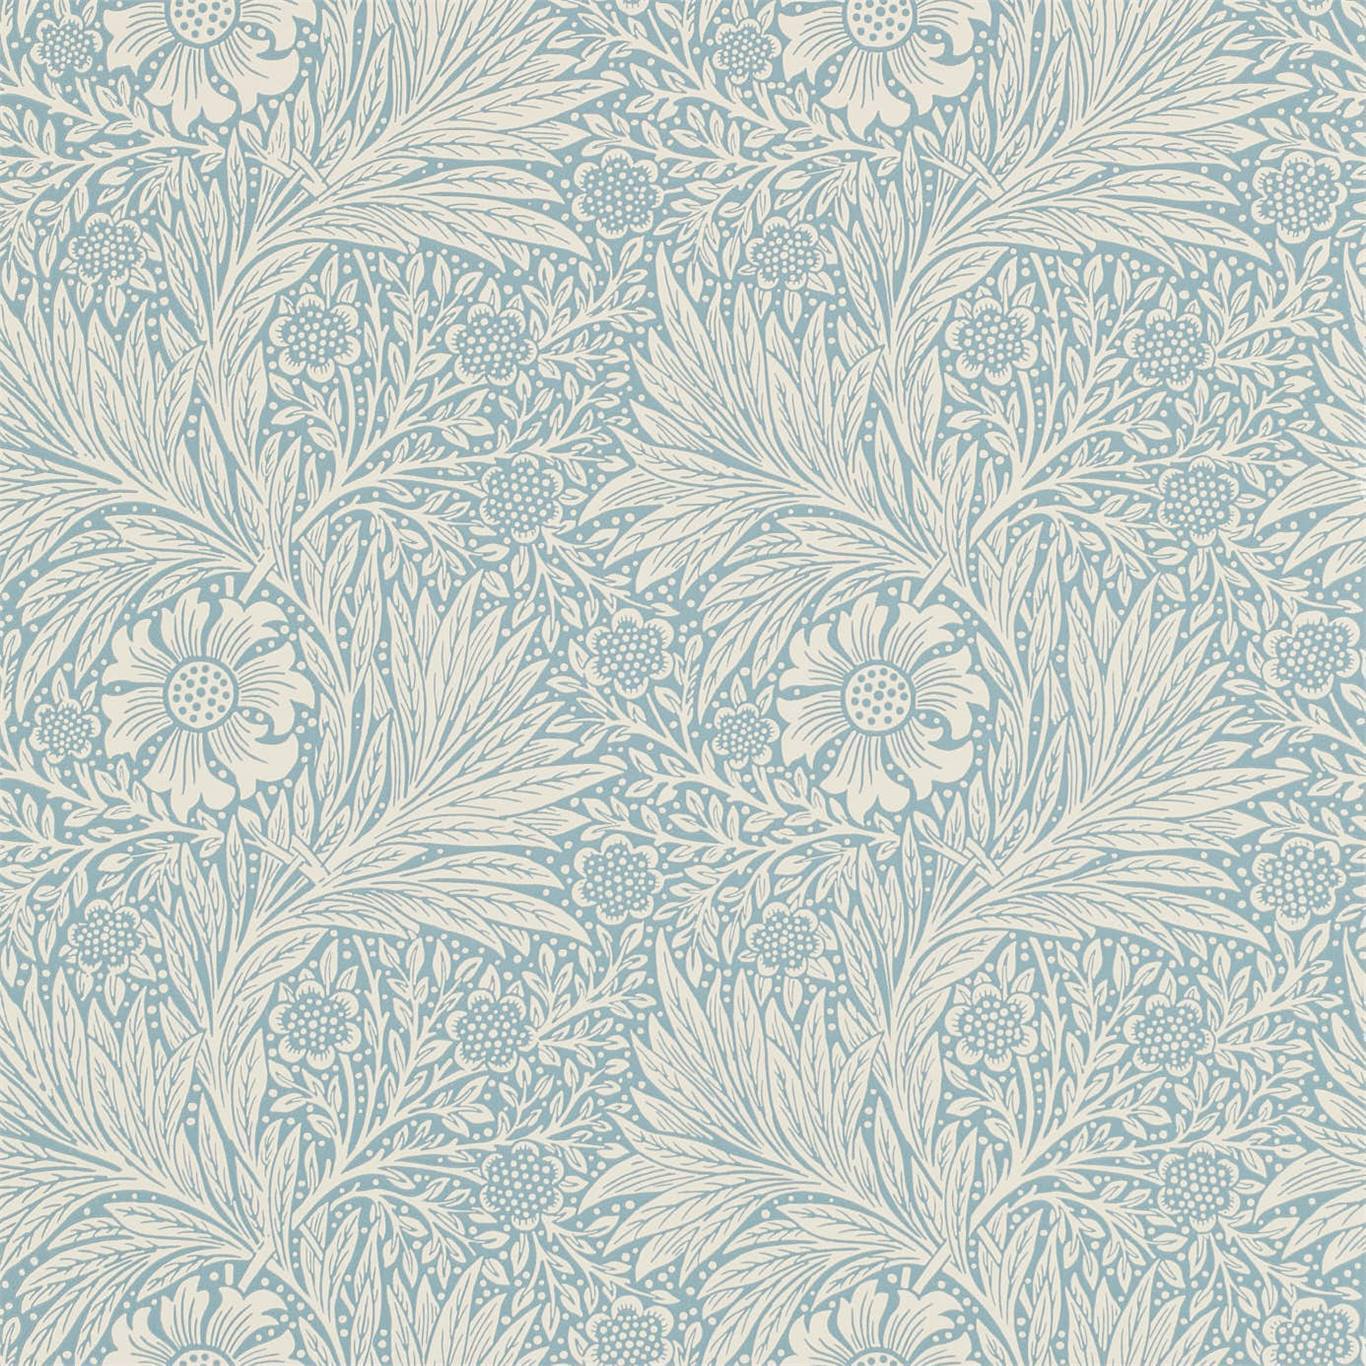 Marigold Wedgwood Wallpaper DCMW216810 by Morris & Co